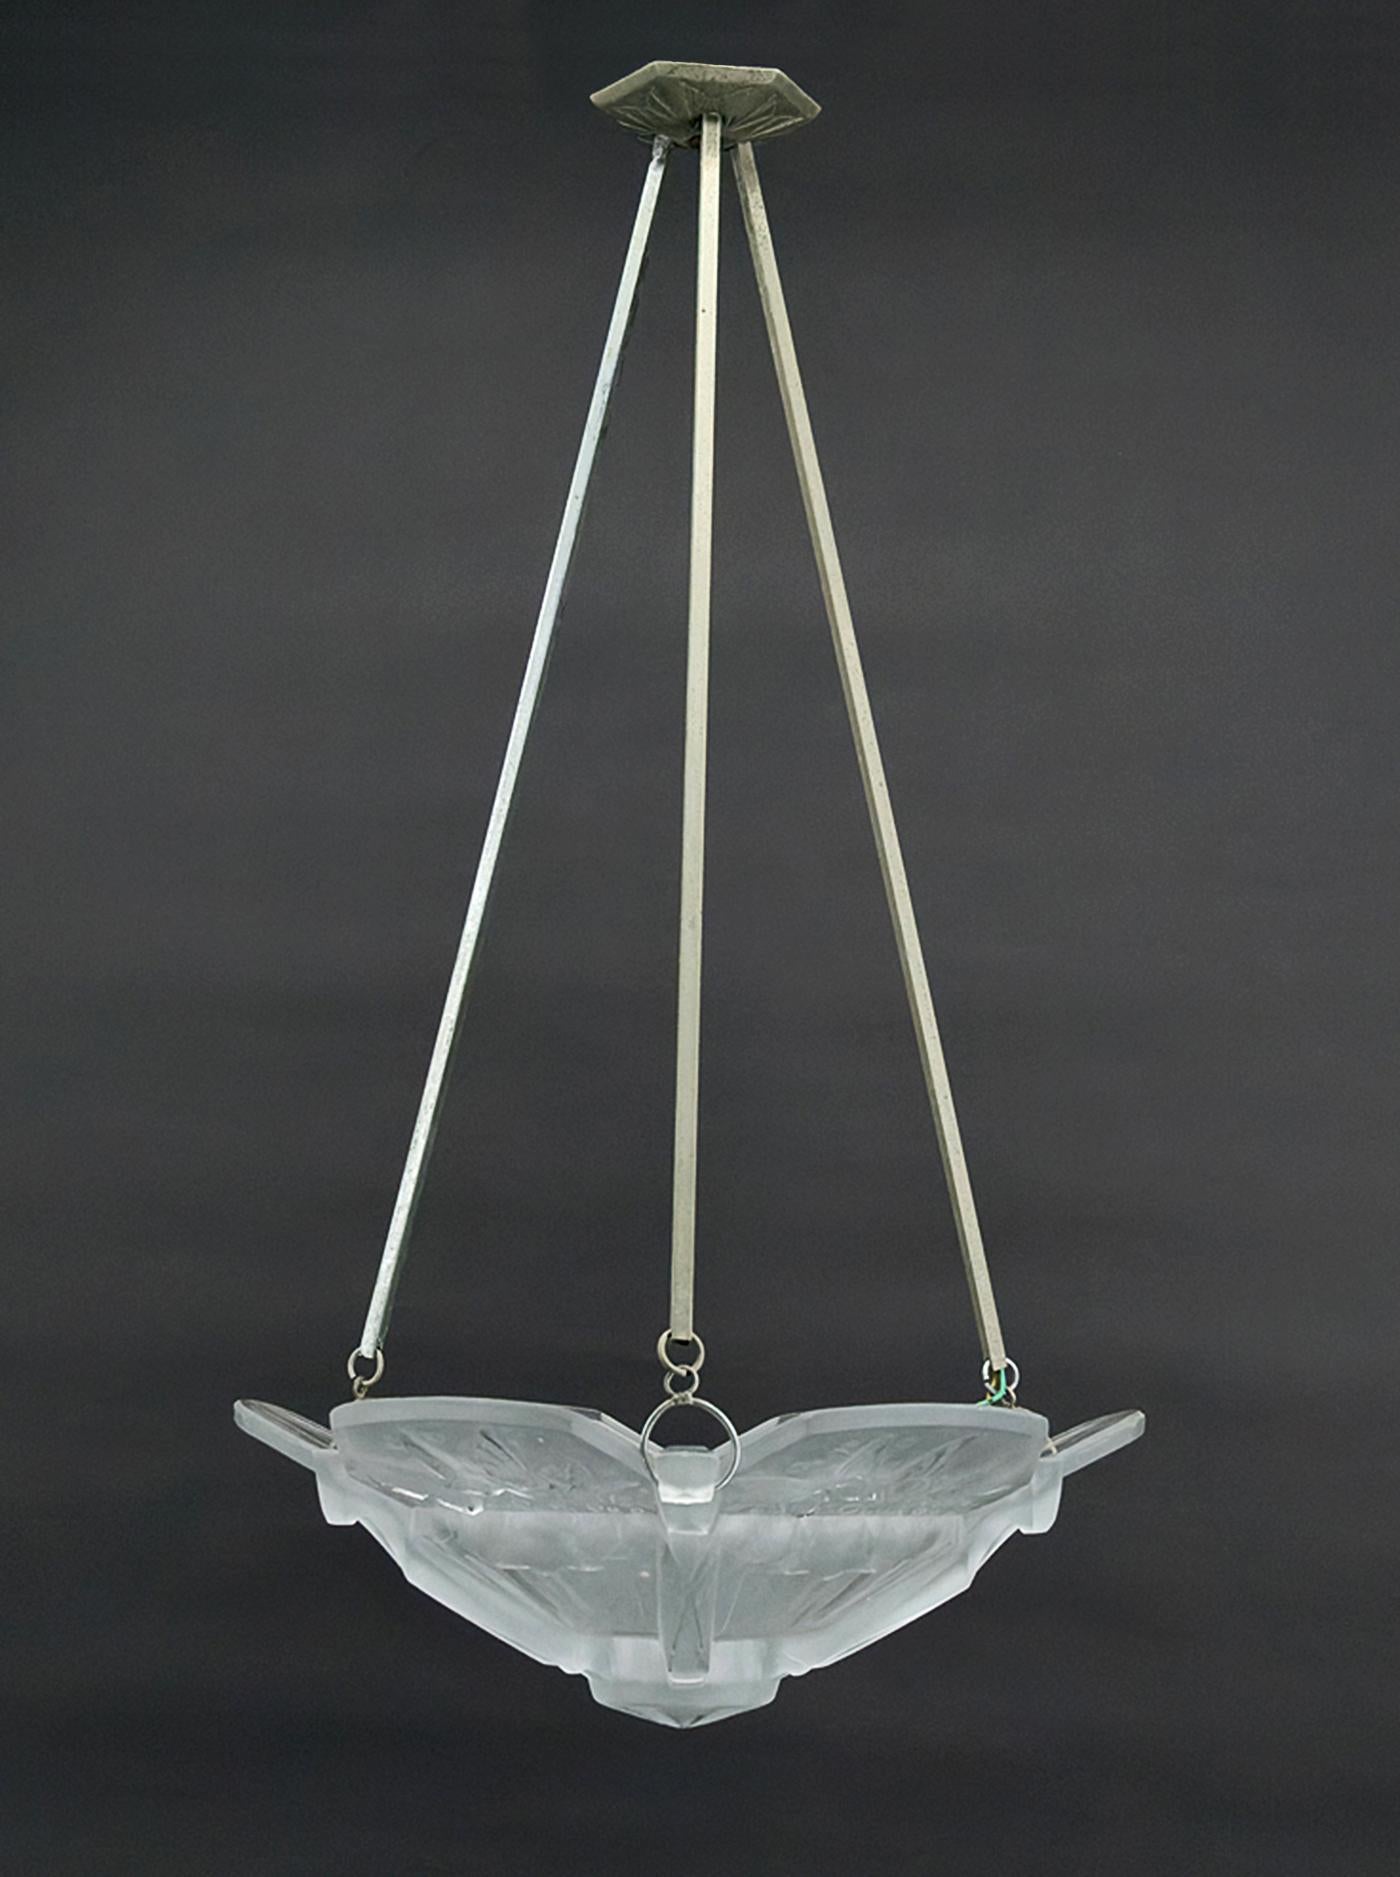 Superb glass chandelier / pendant decorated with butterflies and geometric patterns
Signed “Muller Frères Lunéville”.

Art Deco, France, circa 1920-1925.

Very good condition: Glass in perfect condition, patina and slight oxidation on the metal